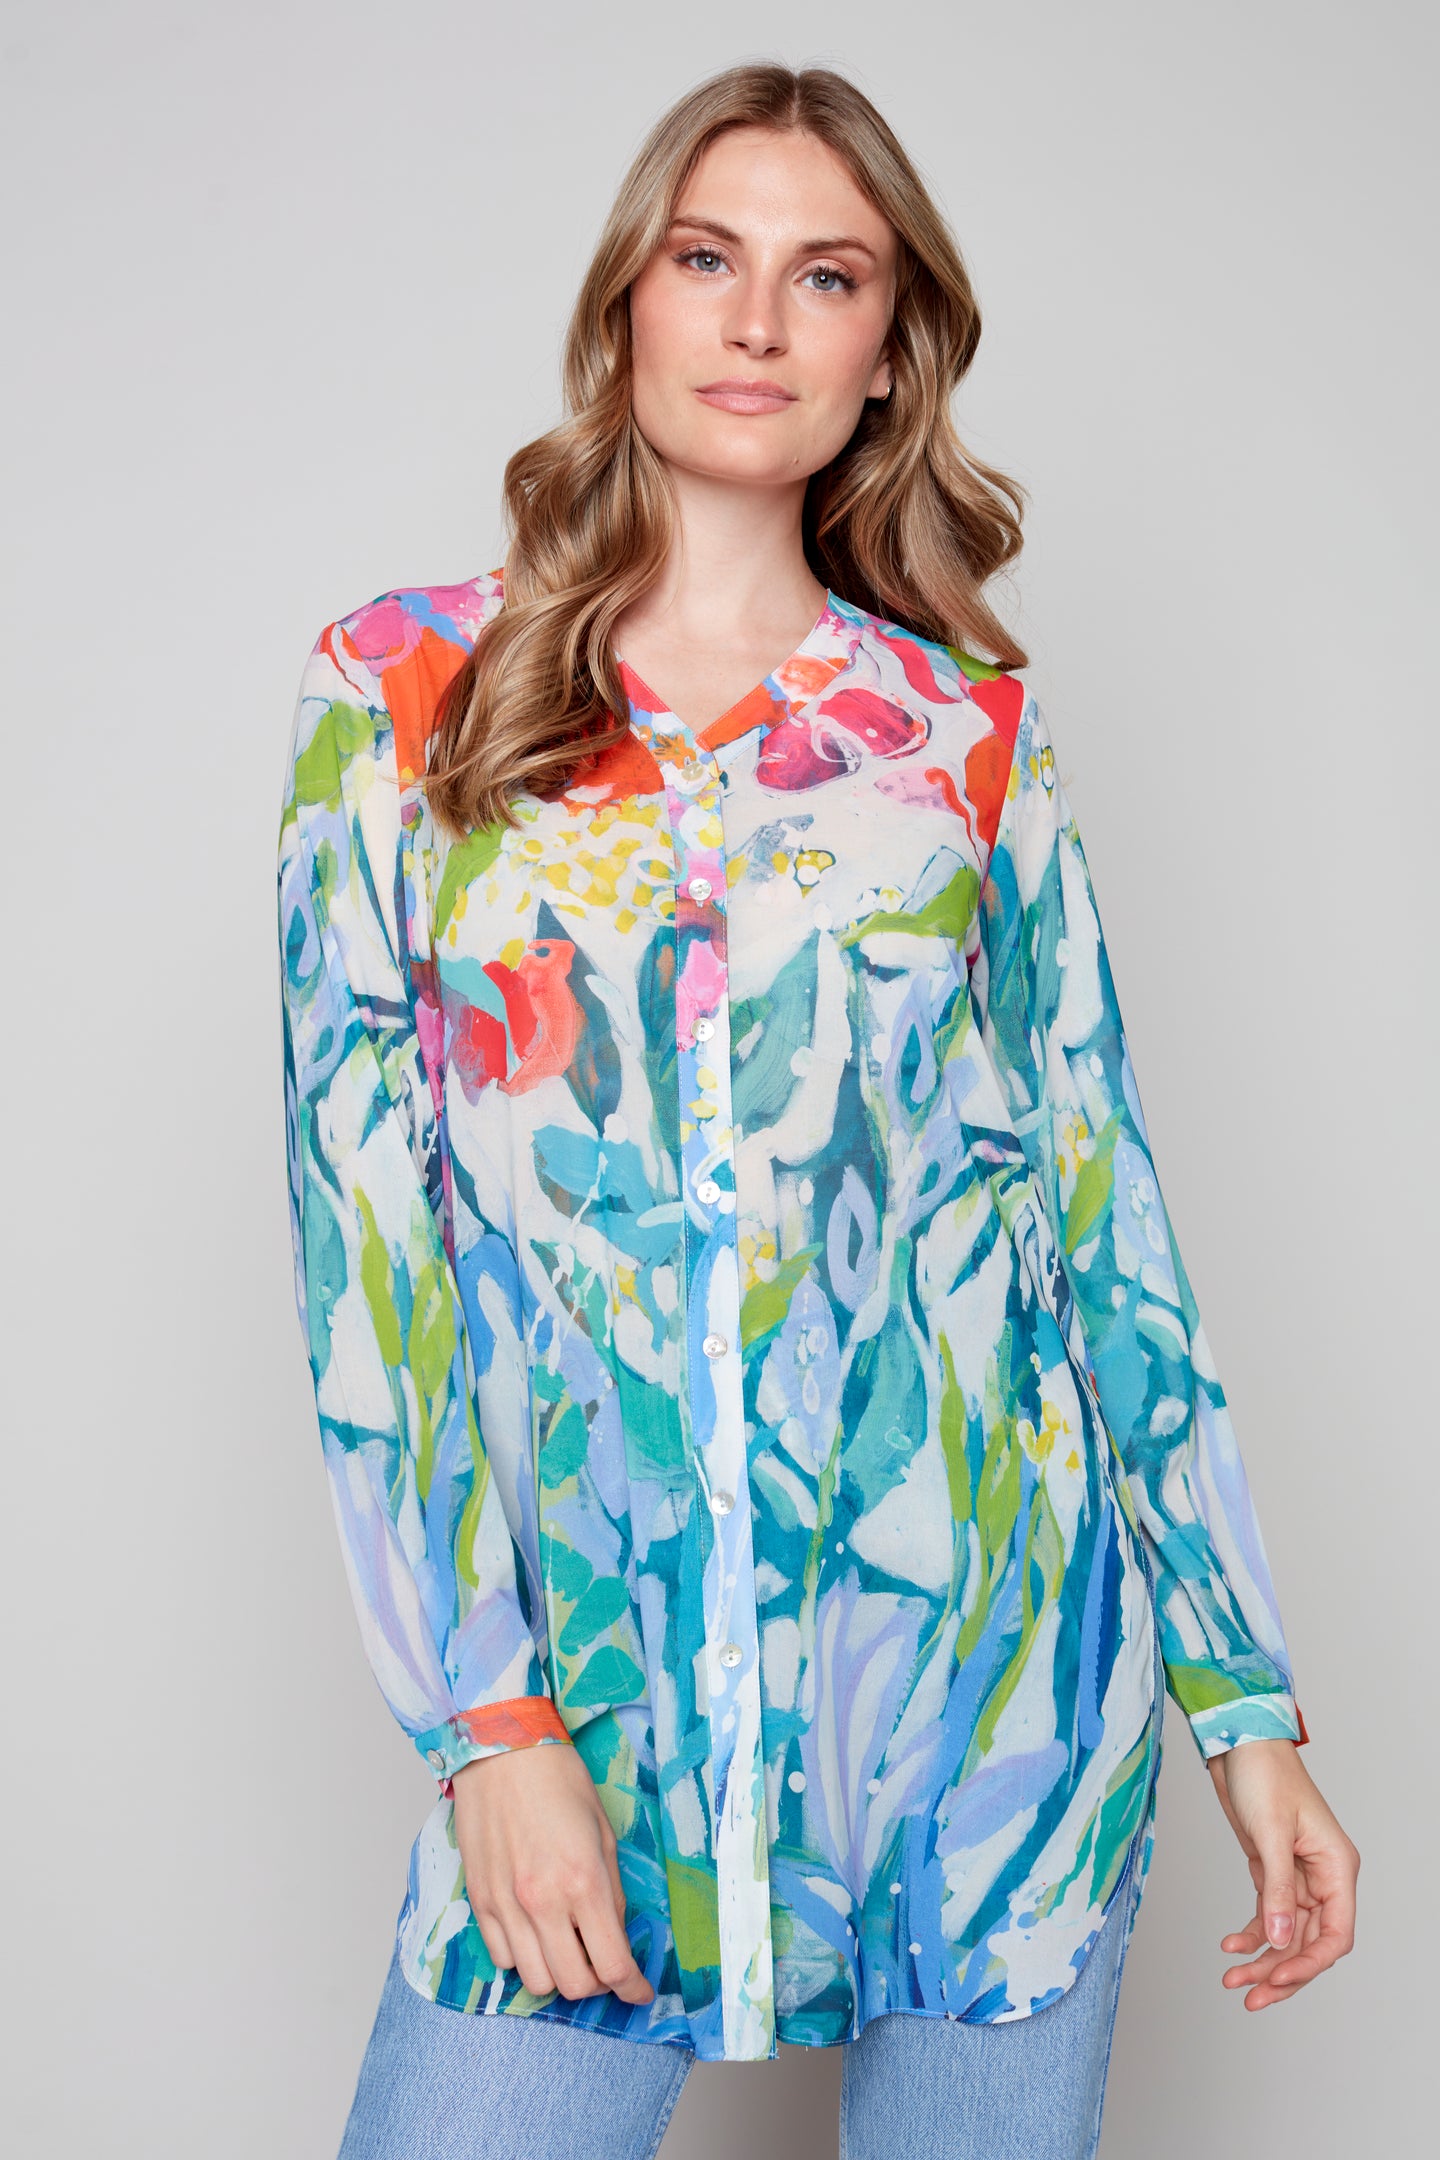 At Liberty in the Garden long button front blouse